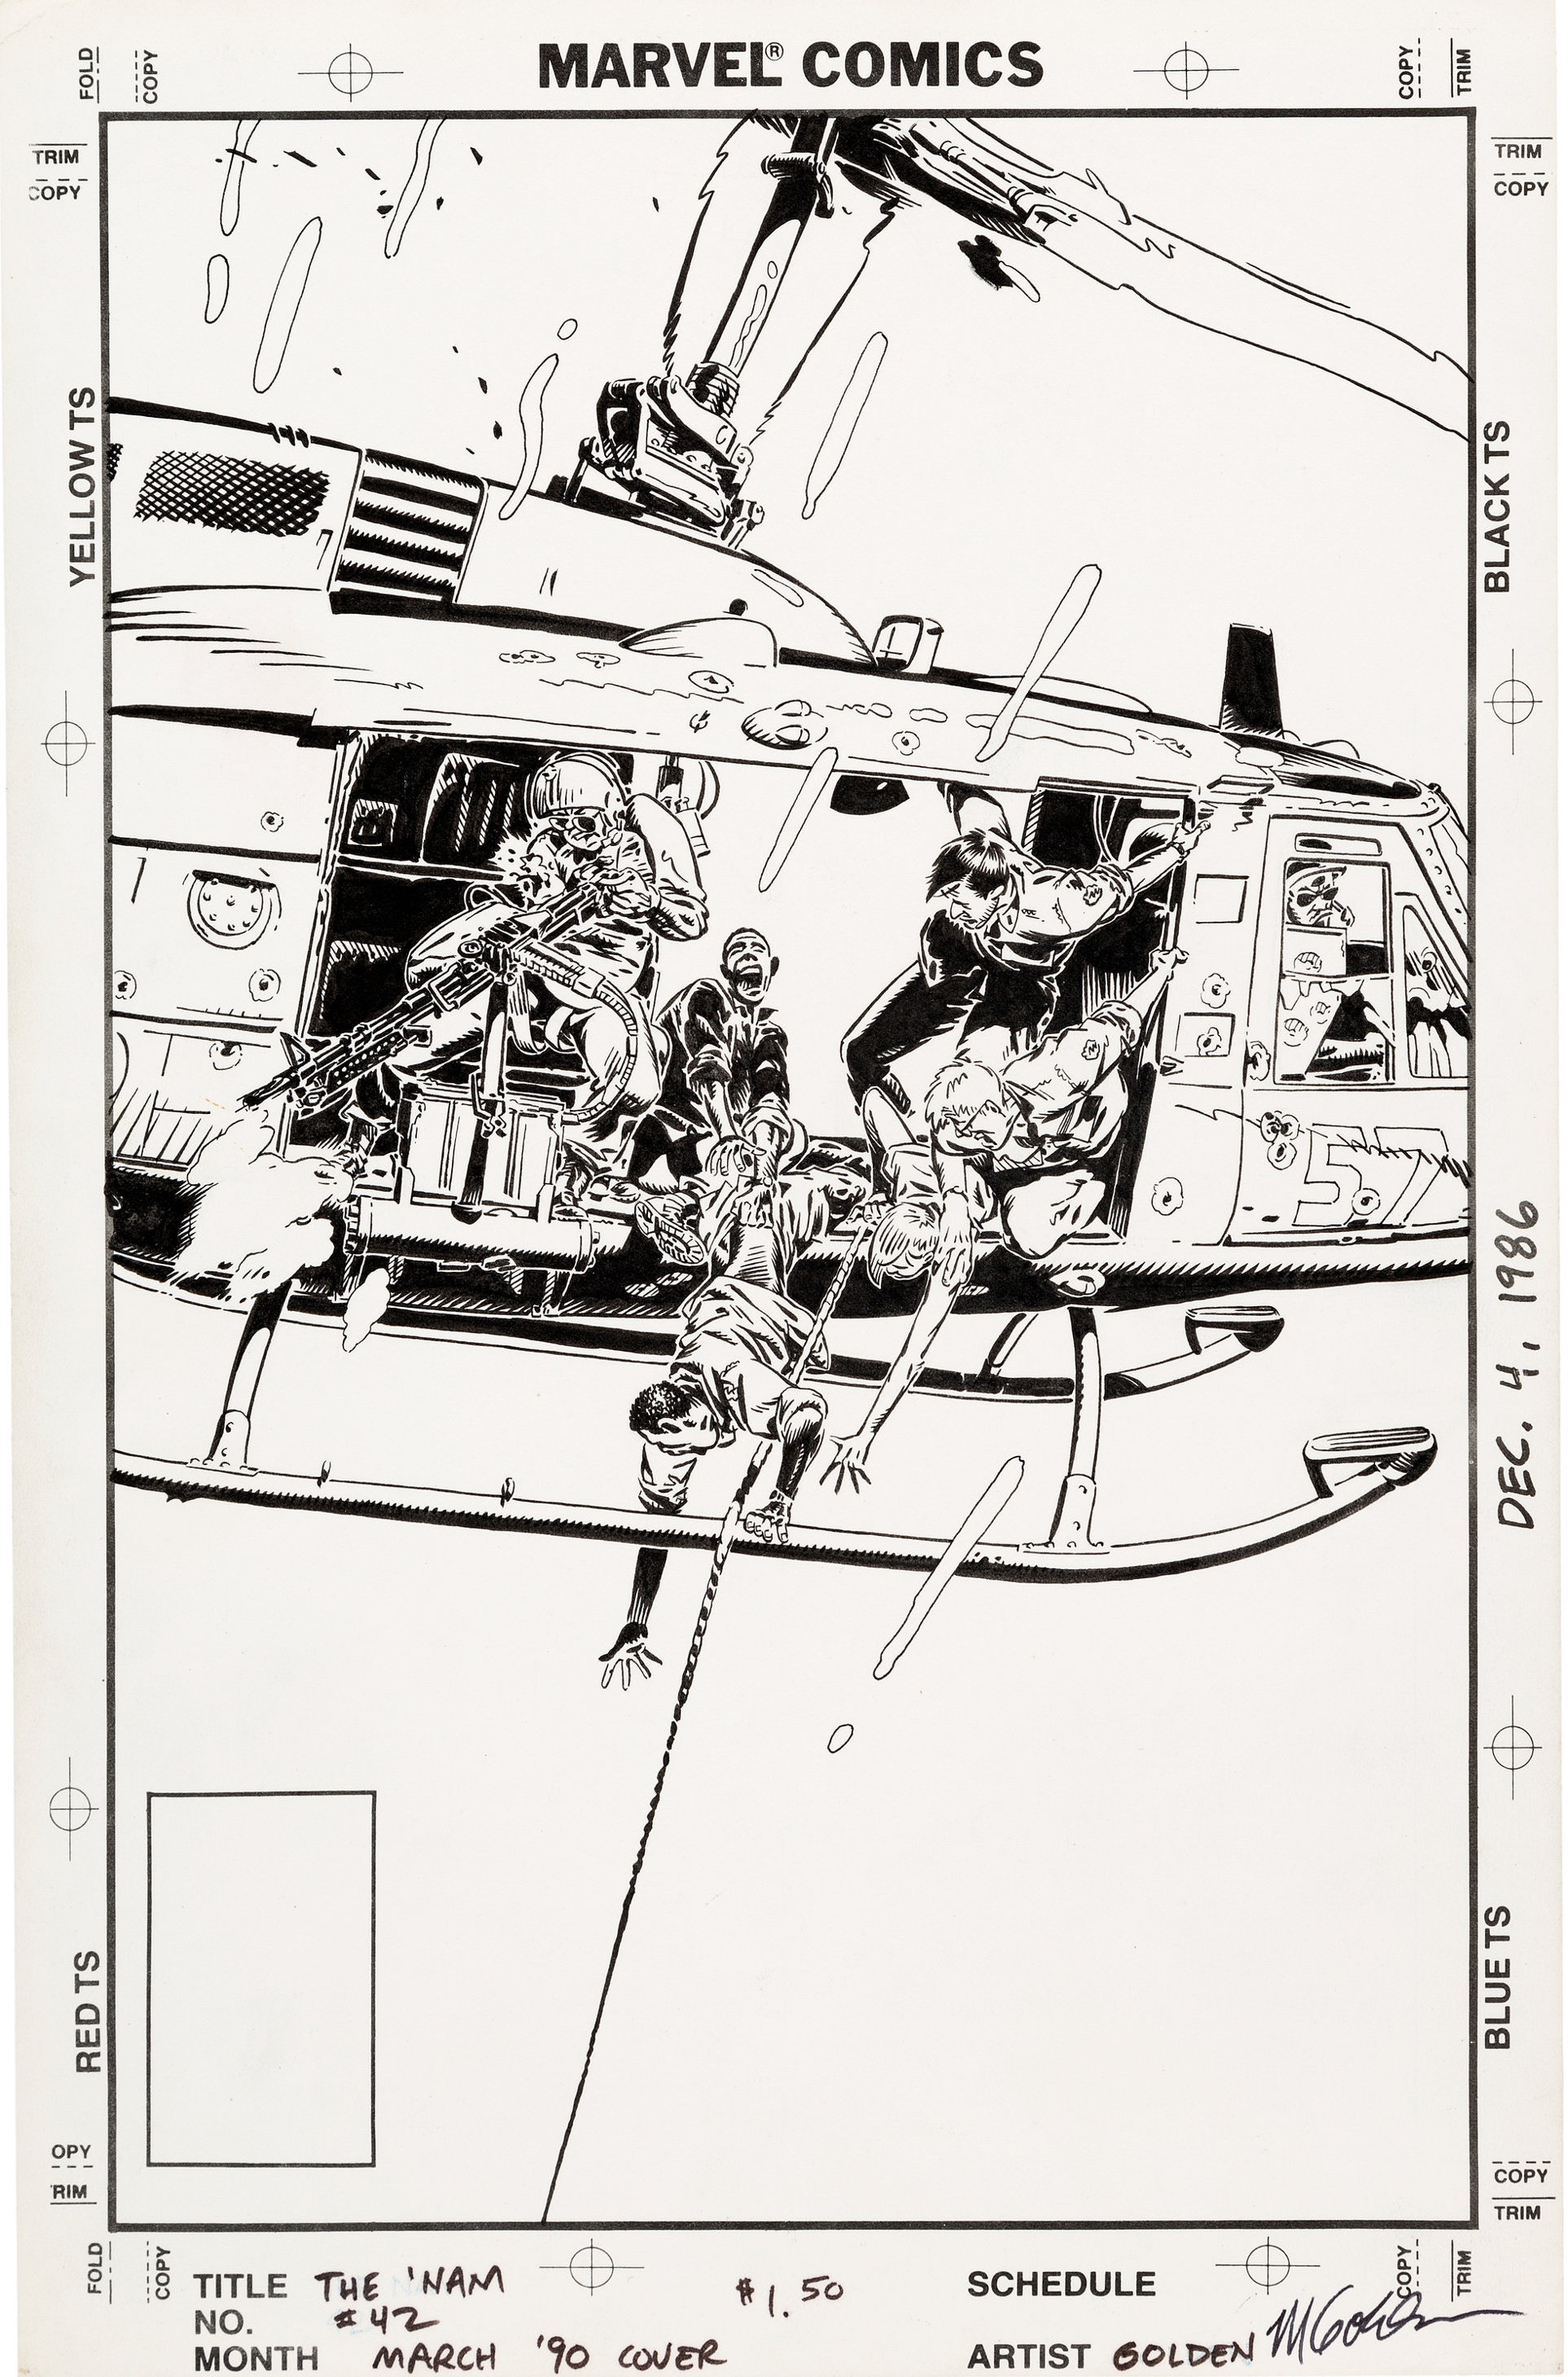 Michael Golden The ‘Nam #42 cover